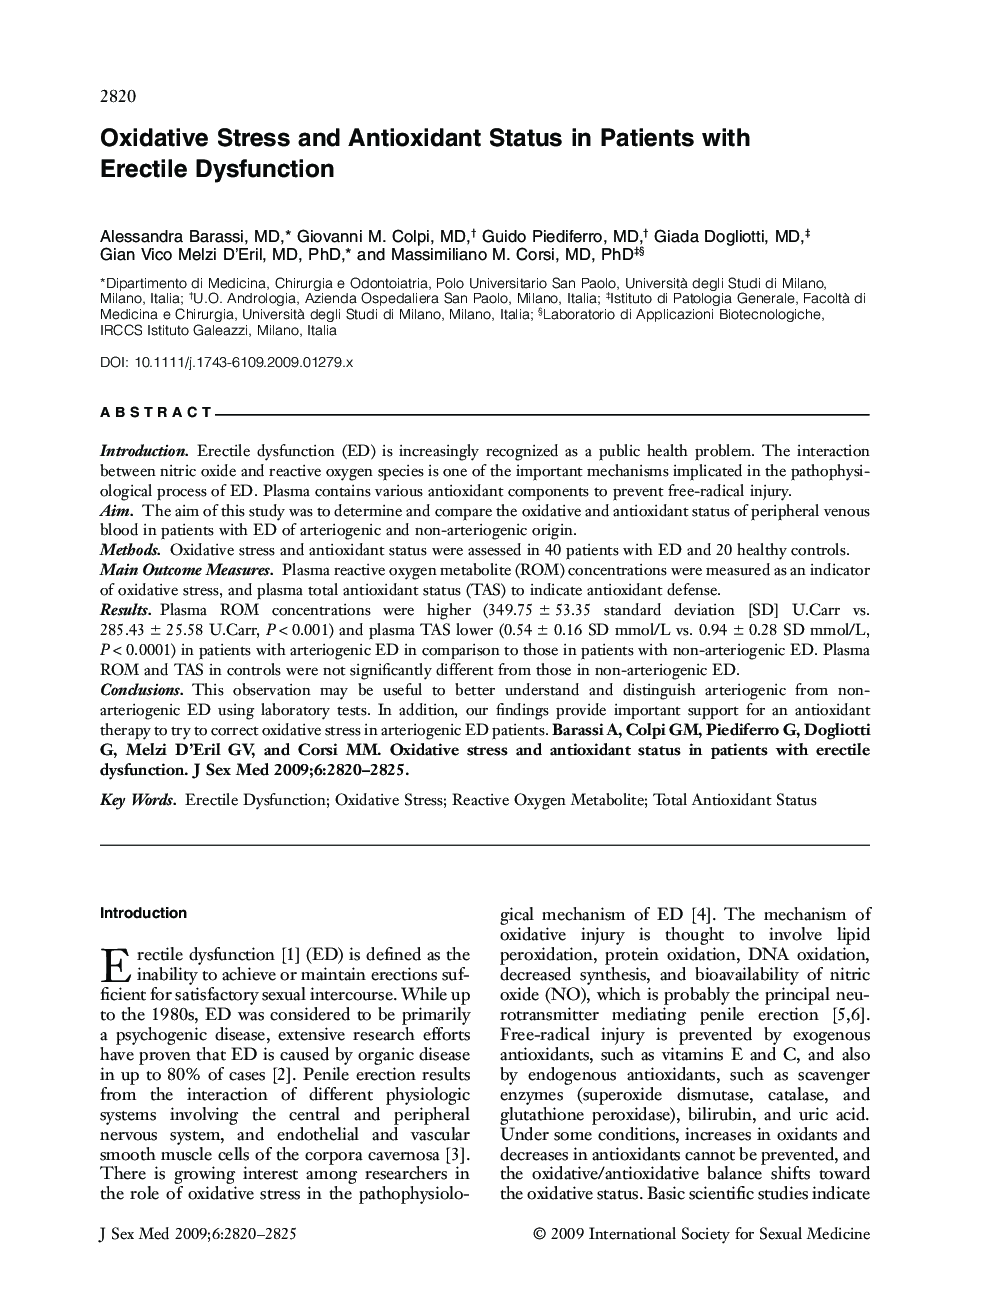 Oxidative Stress and Antioxidant Status in Patients with Erectile Dysfunction